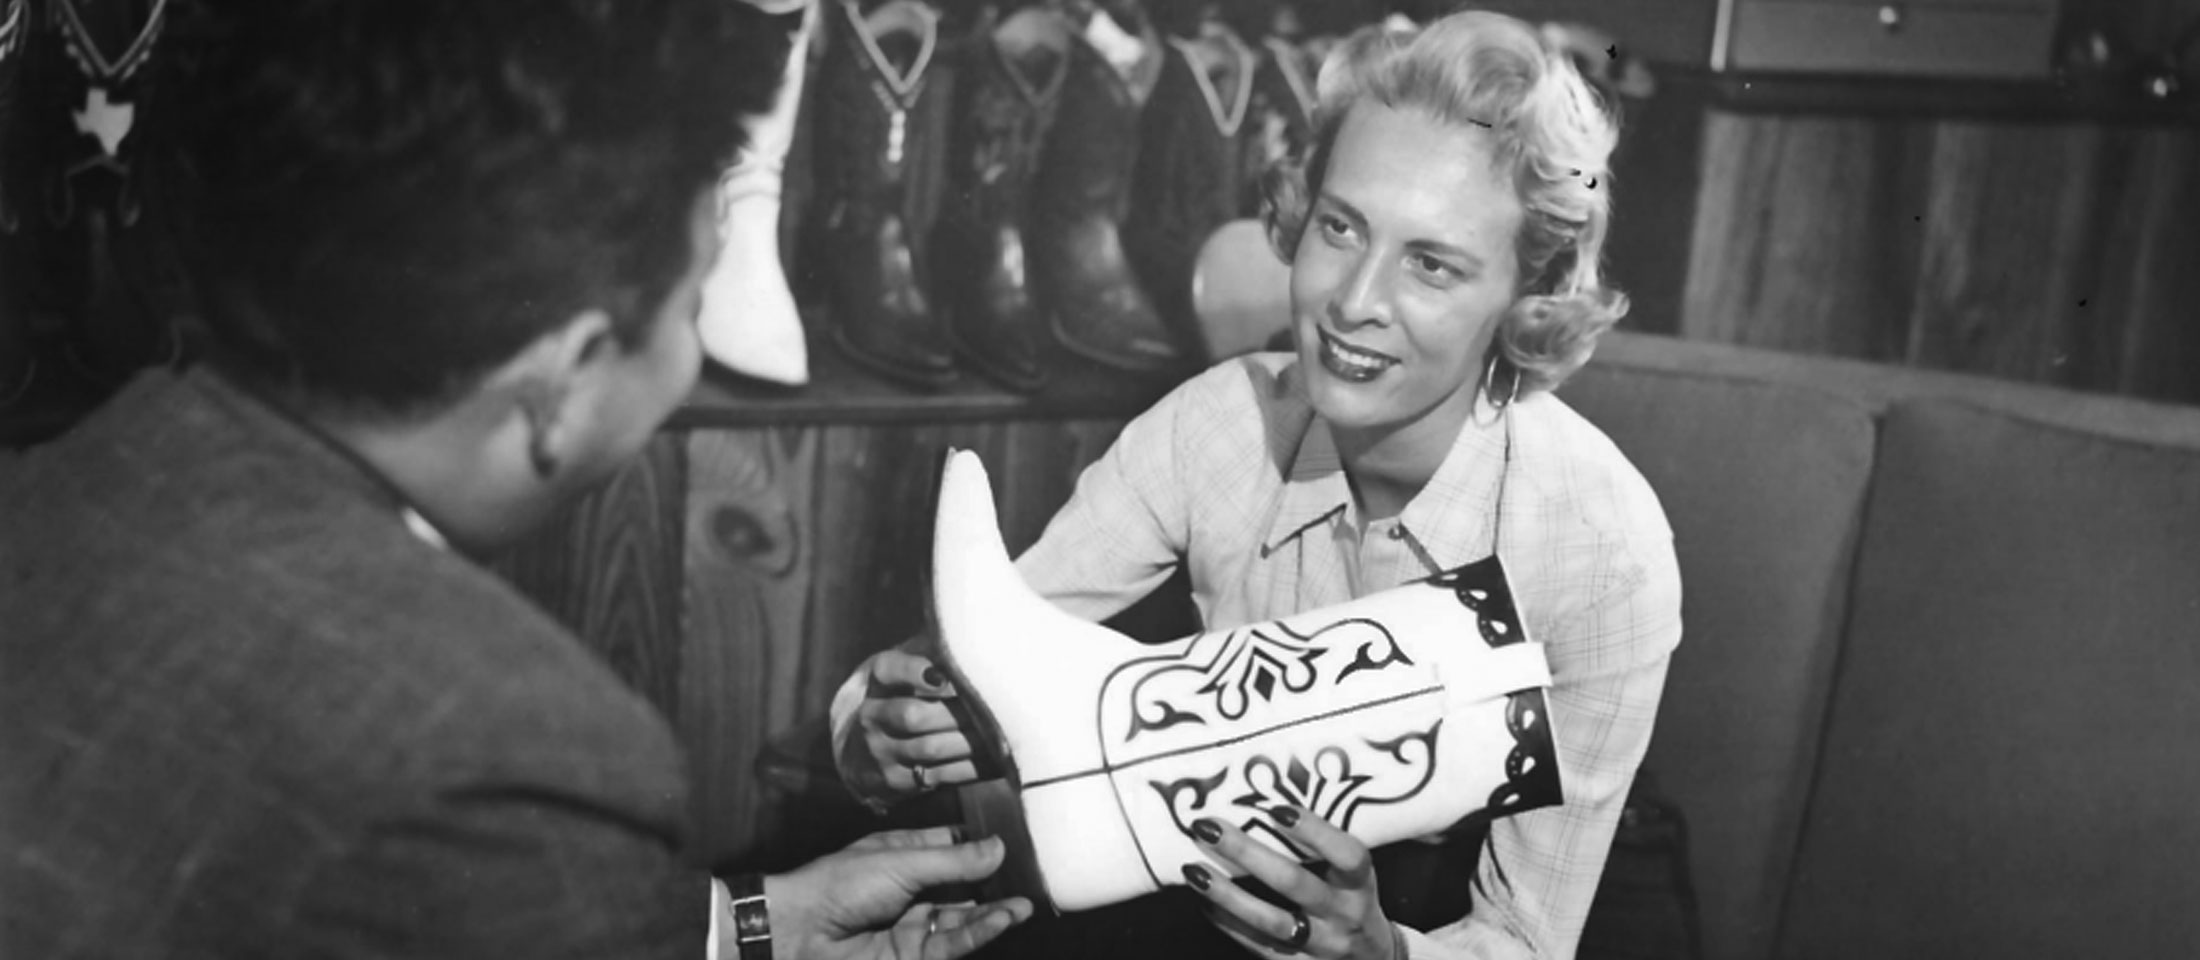 A black and white photo of a young Jane Chilton Justin with blonde hair, wearing business attire and holding a cowboy boot, presenting a boot to a customer.